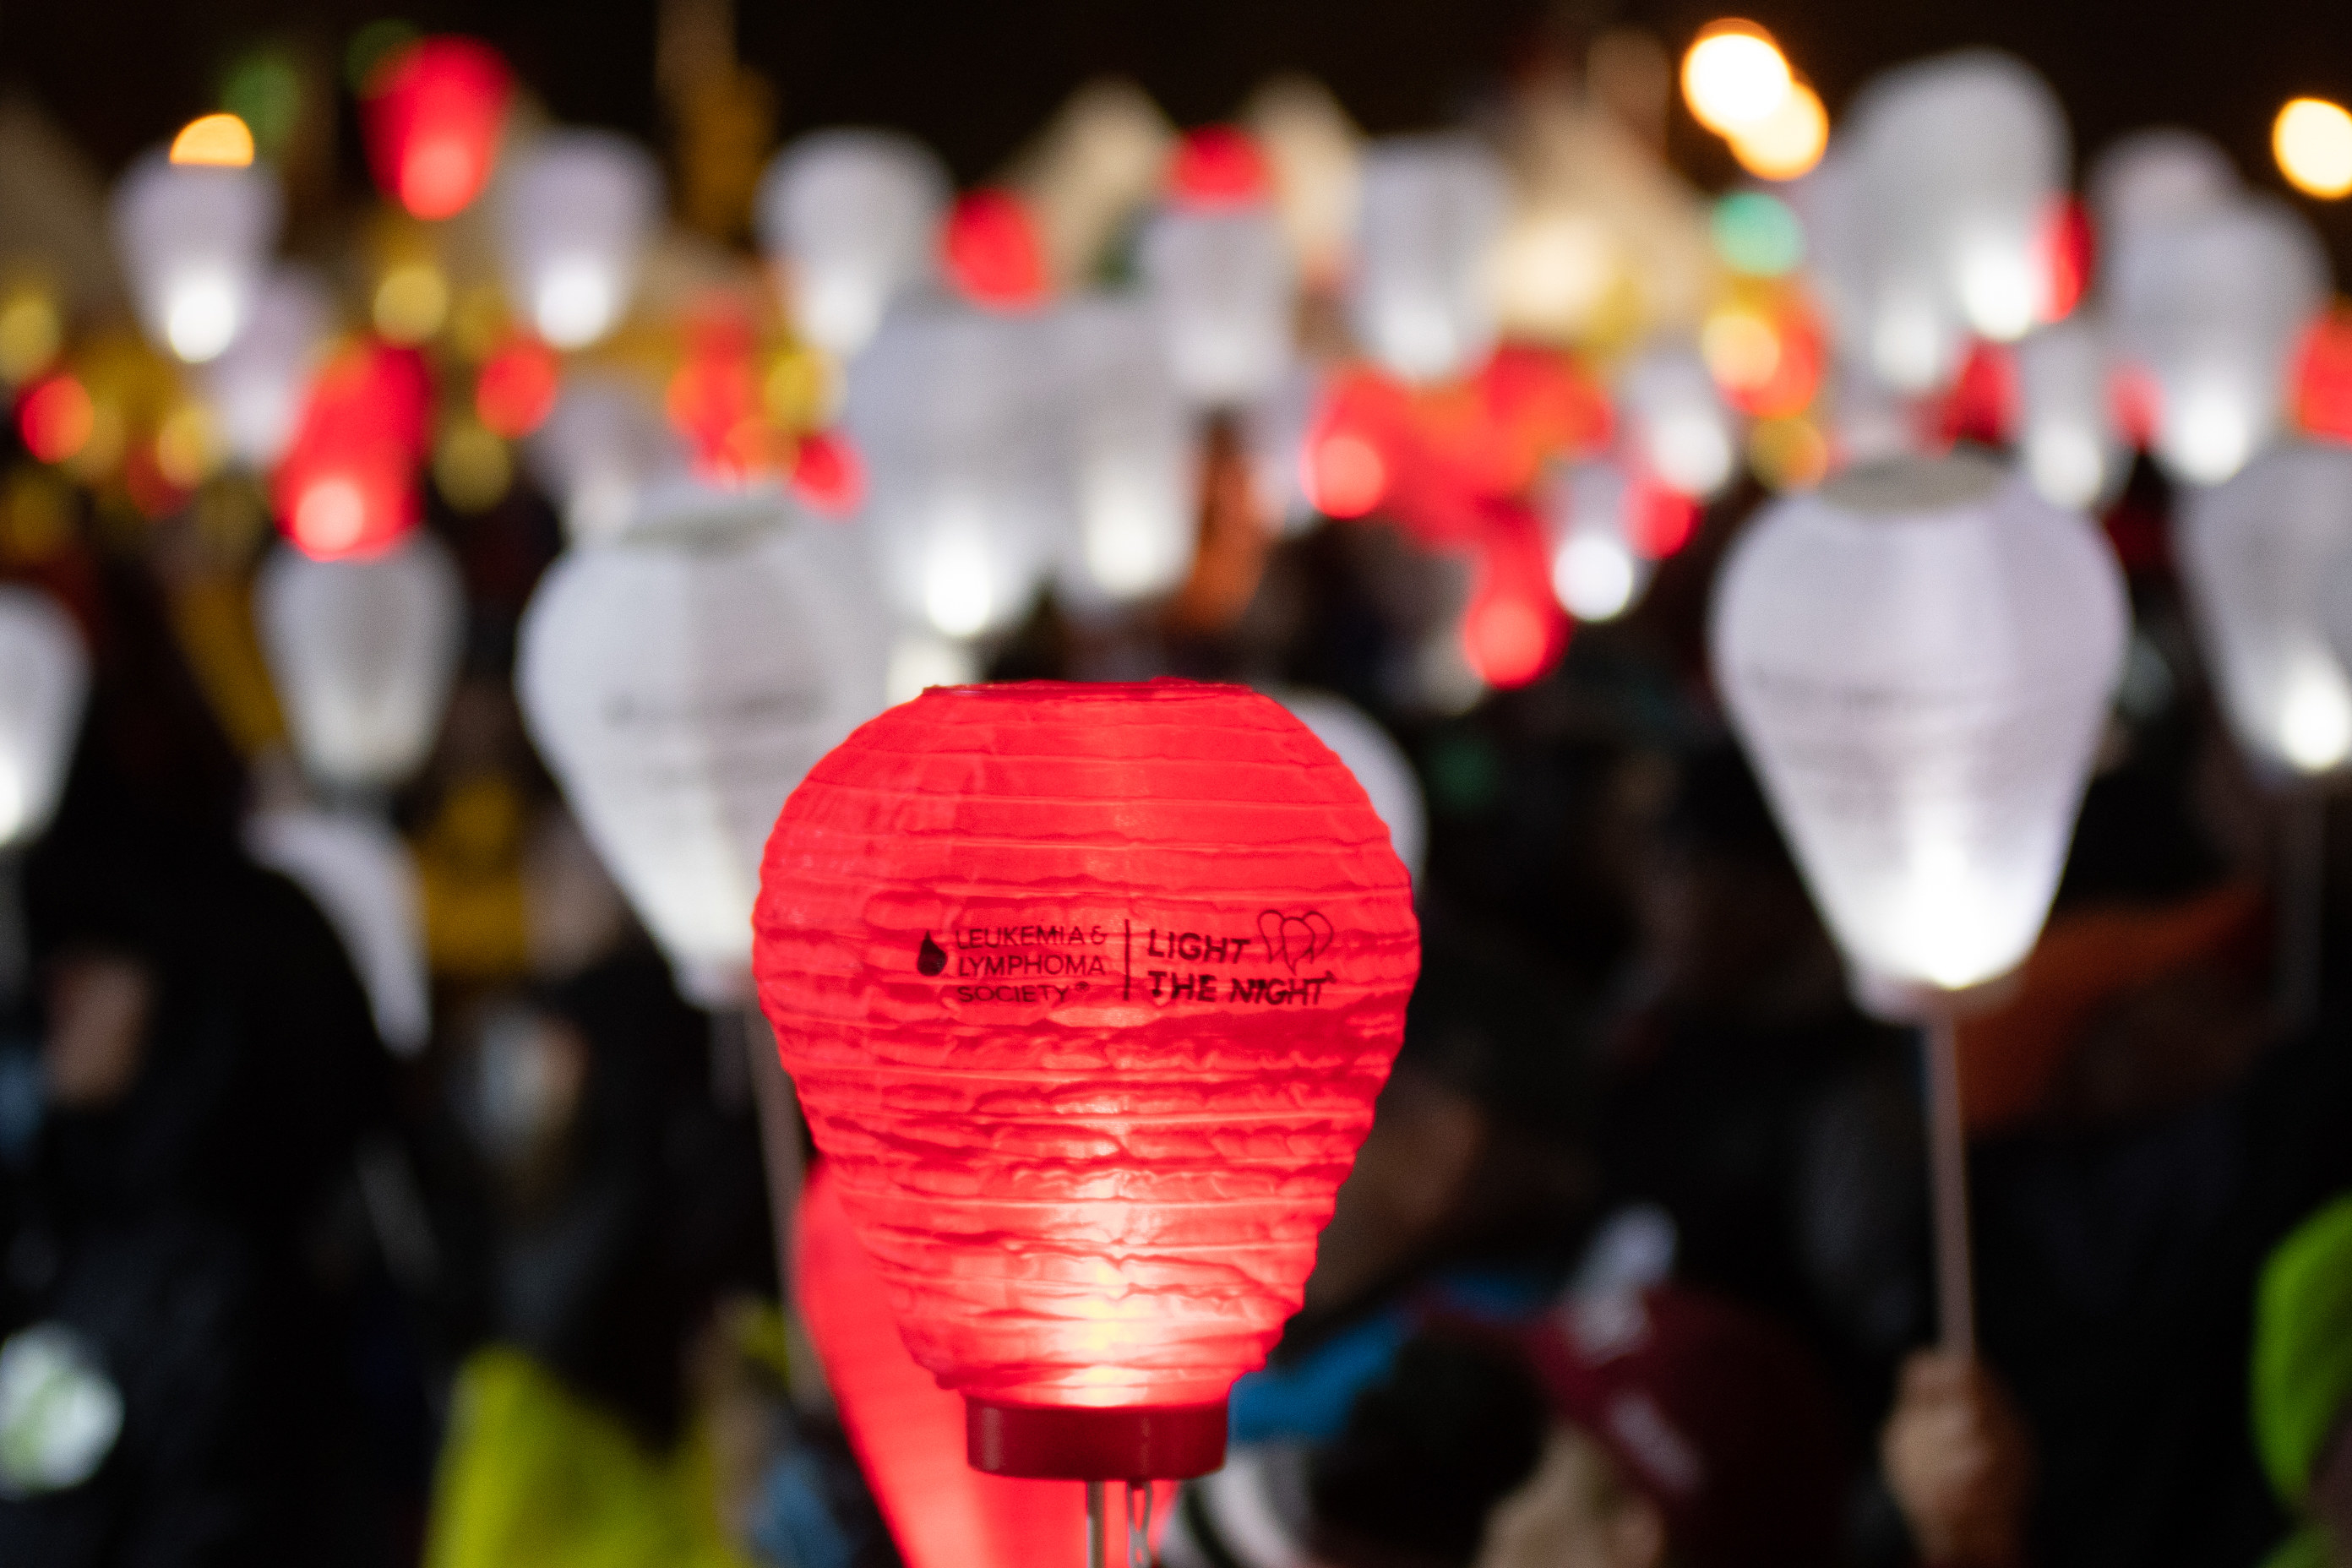 A crowd holding up lit paper lanterns at night